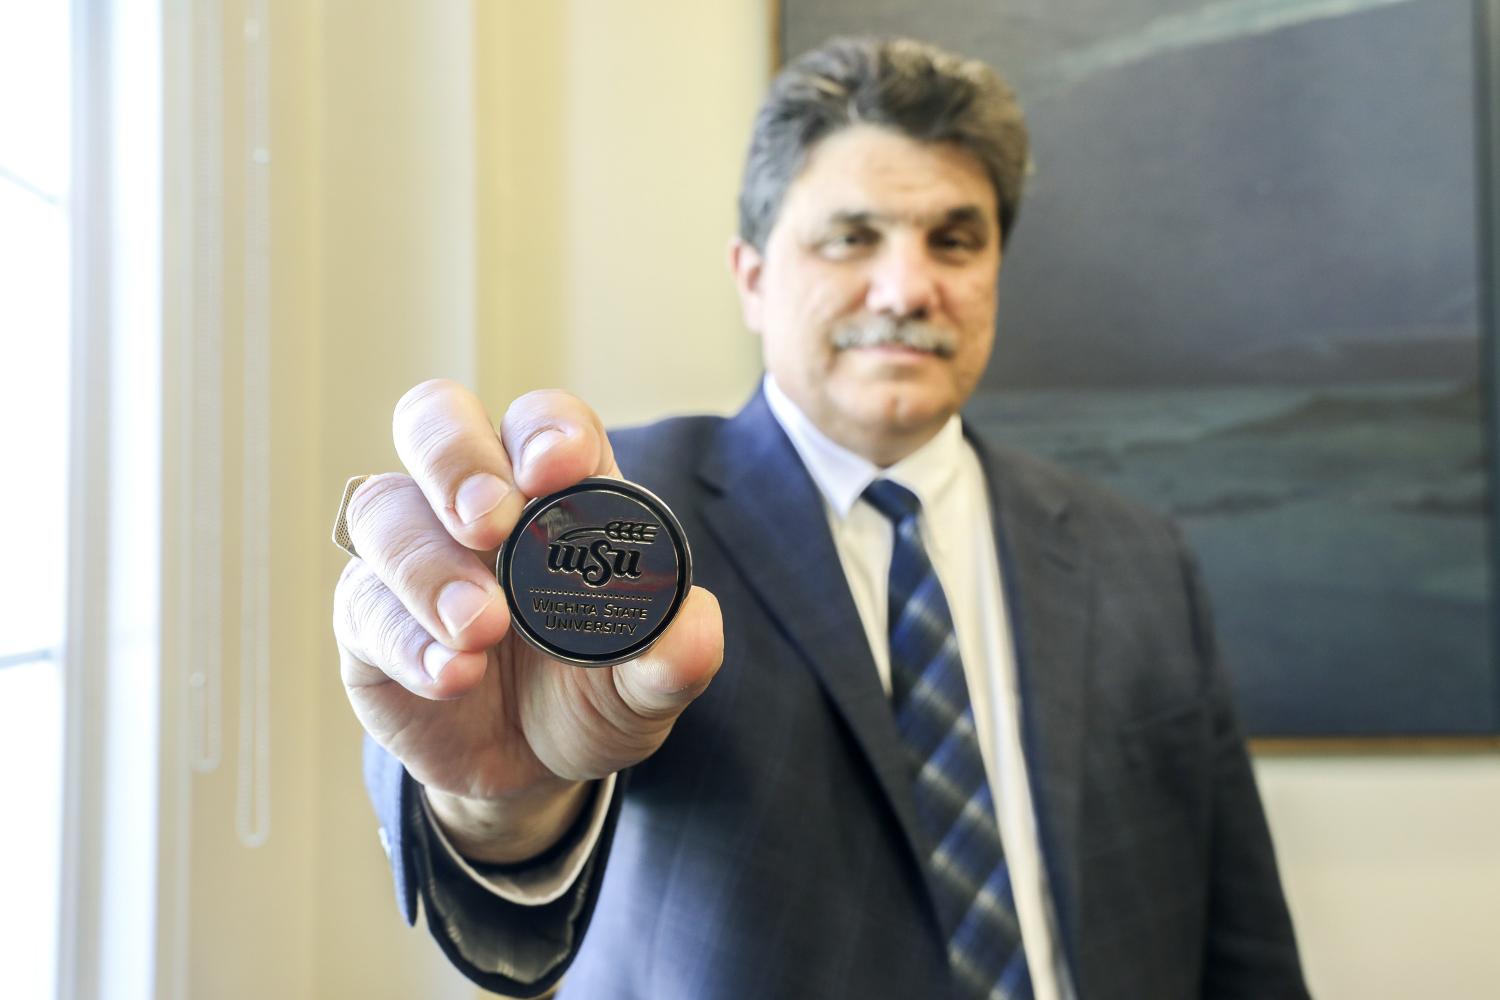 WSU Provost and Senior Vice President Anthony Vizzini holds one of the challenge coins given to graduates during the
ceremony. Dr. Vizzini said he always carries one in his pocket.